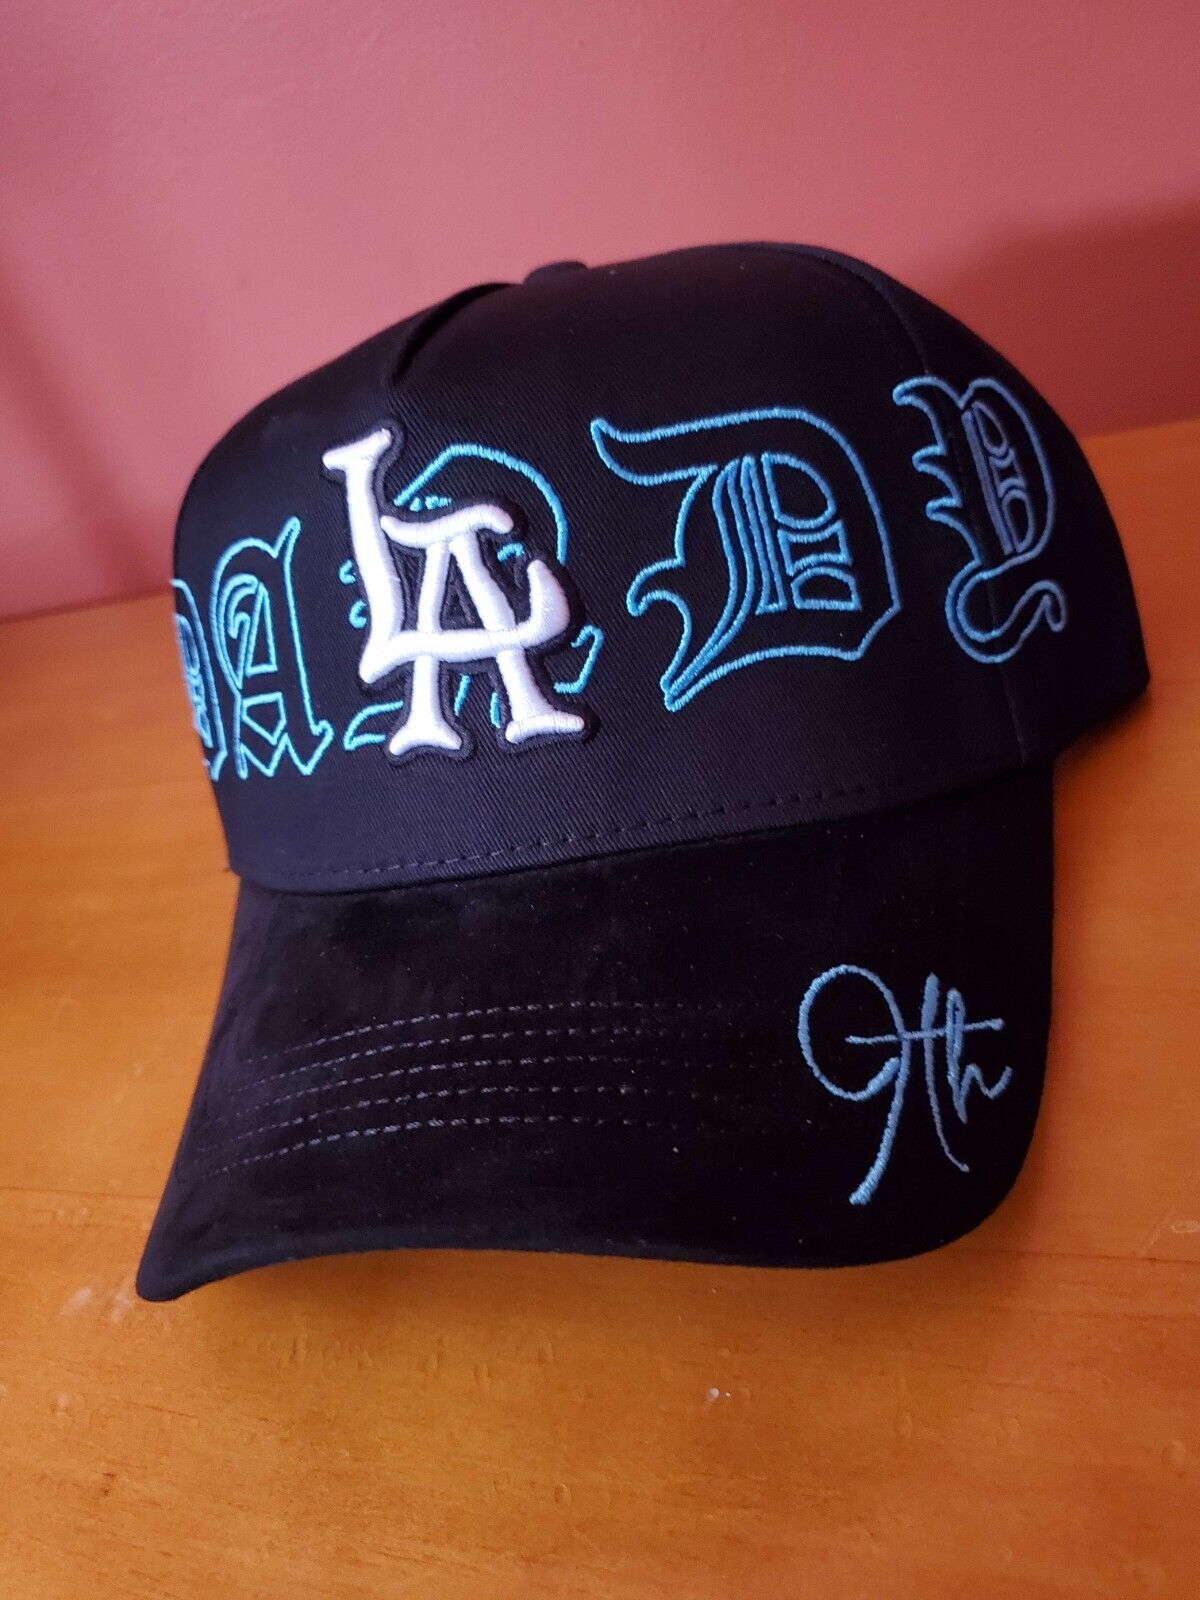 Dandy Hats - Exclusive Limited “LA” Dandy 9th Anniversary Hat *In Hand*